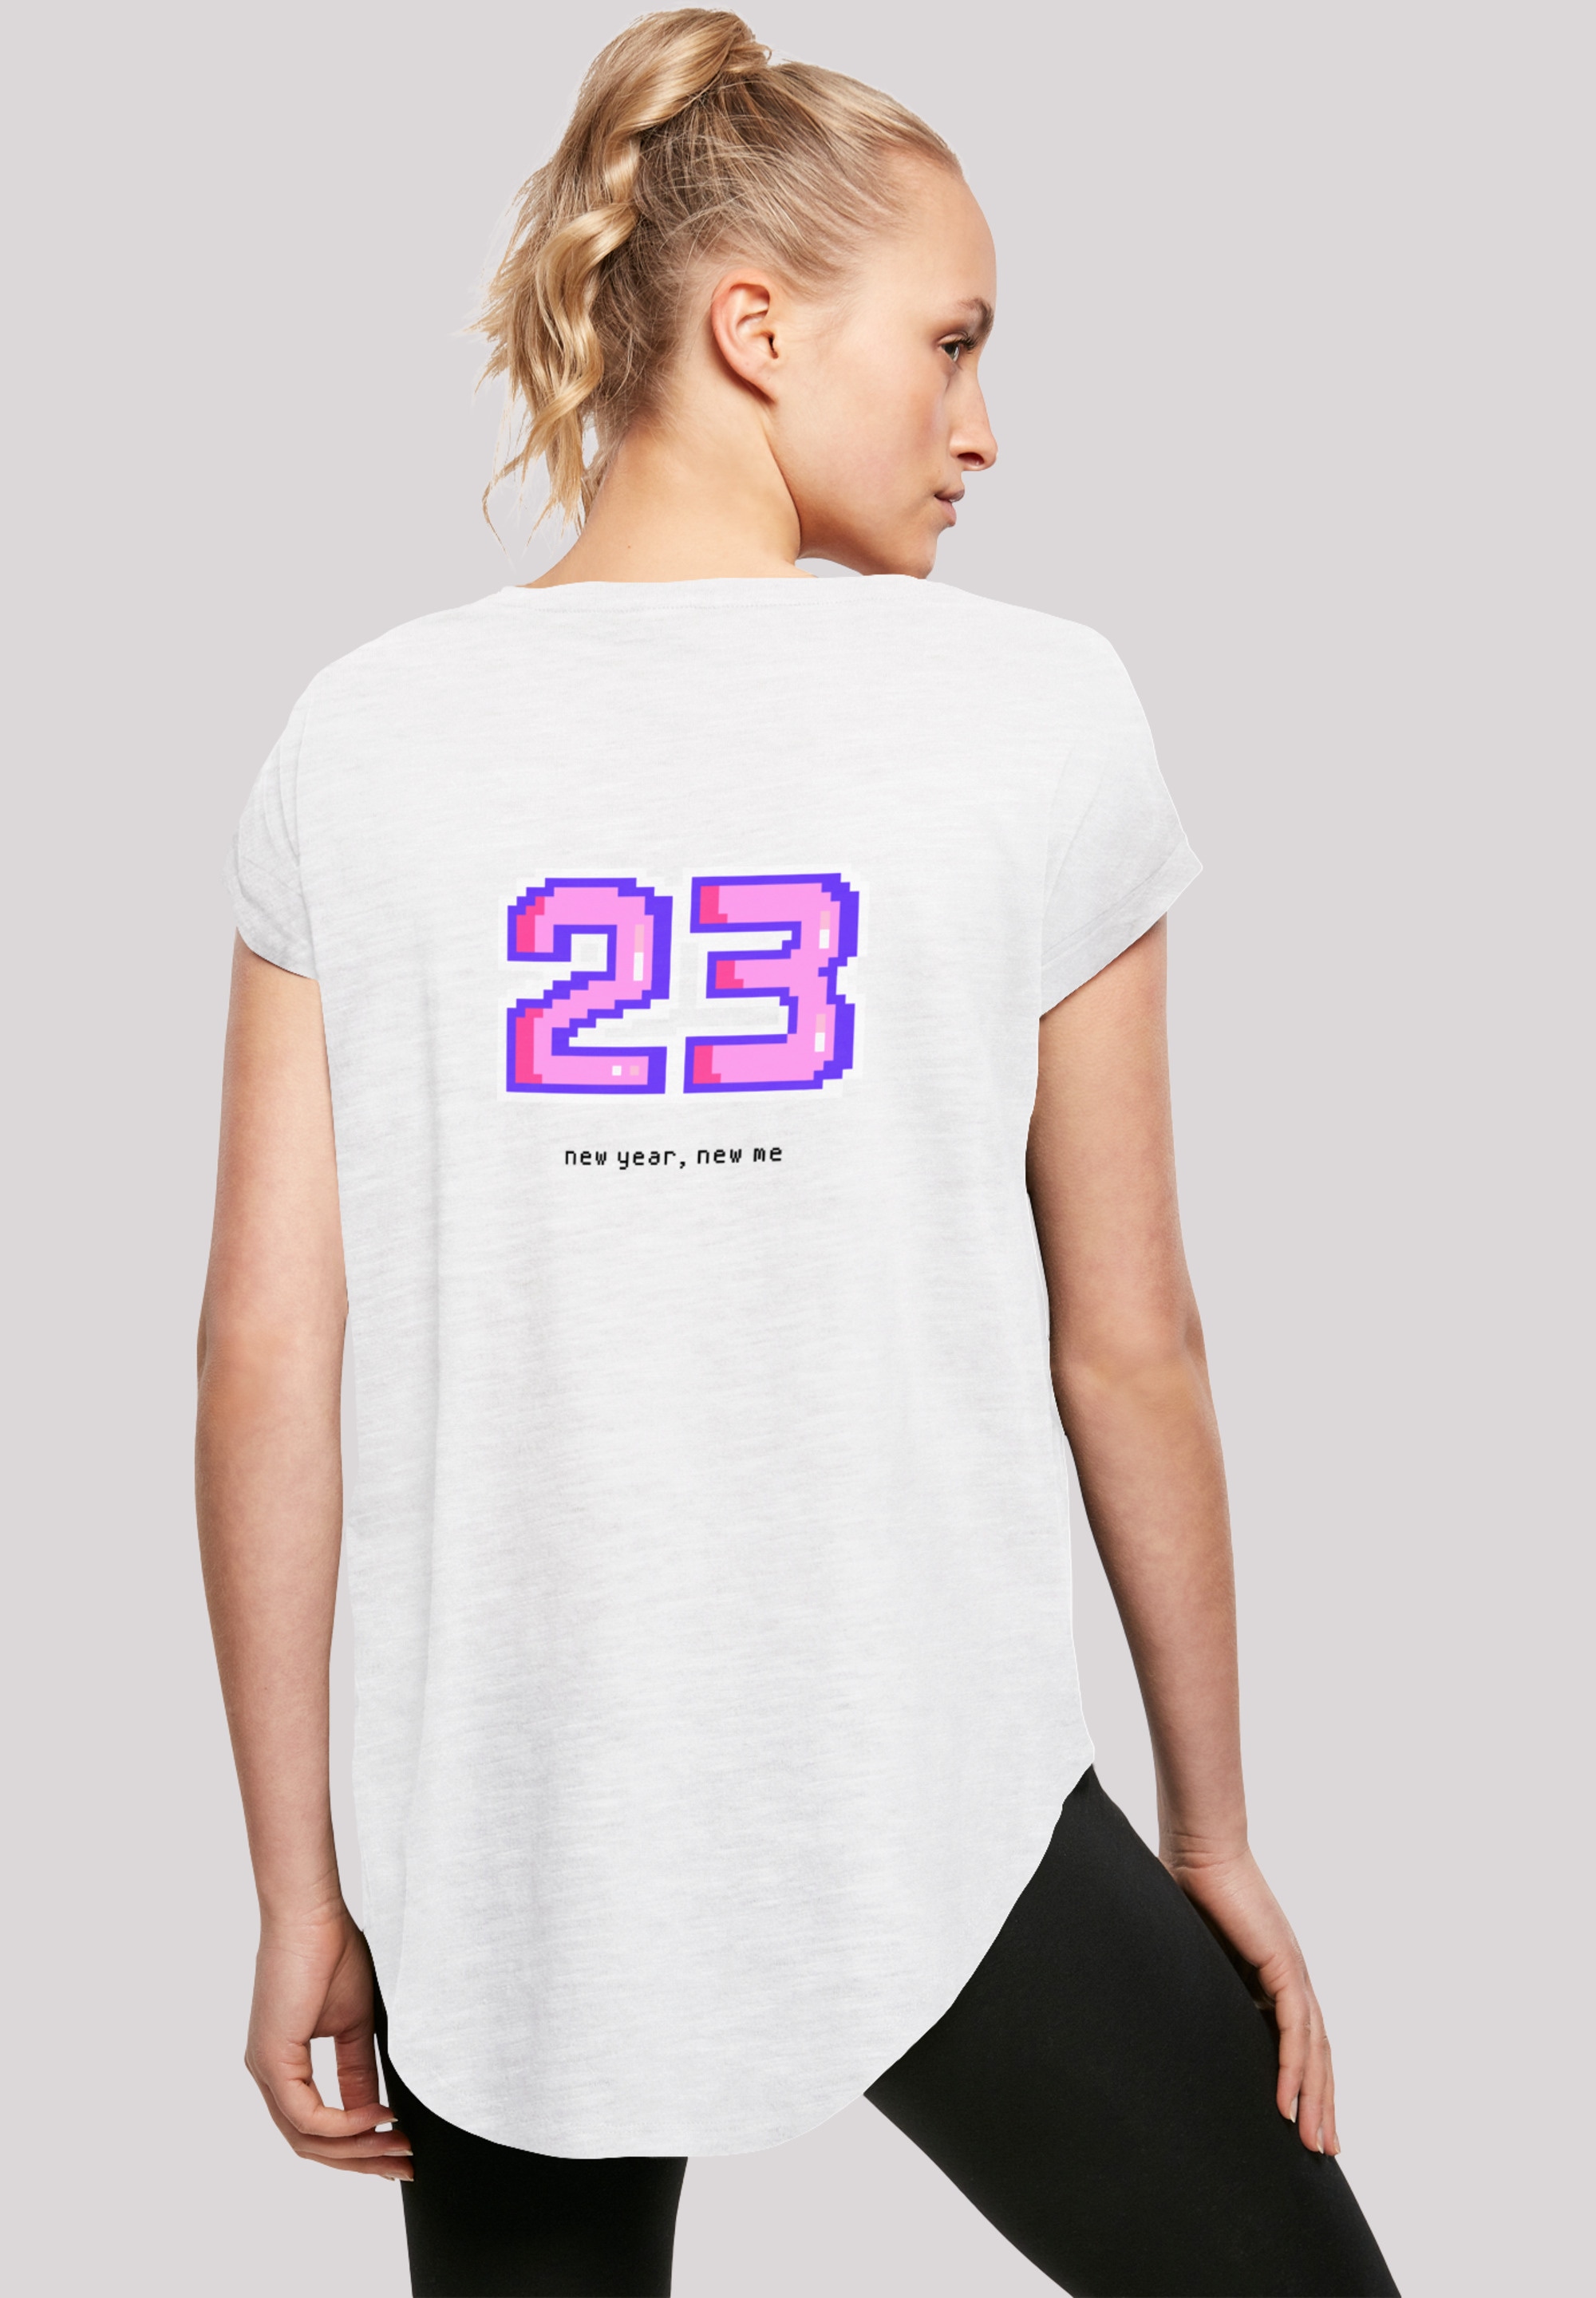 Party People »F4NT4STIC Only«, F4NT4STIC T-Shirt bestellen Happy Long T-Shirt Print Cut SIlvester